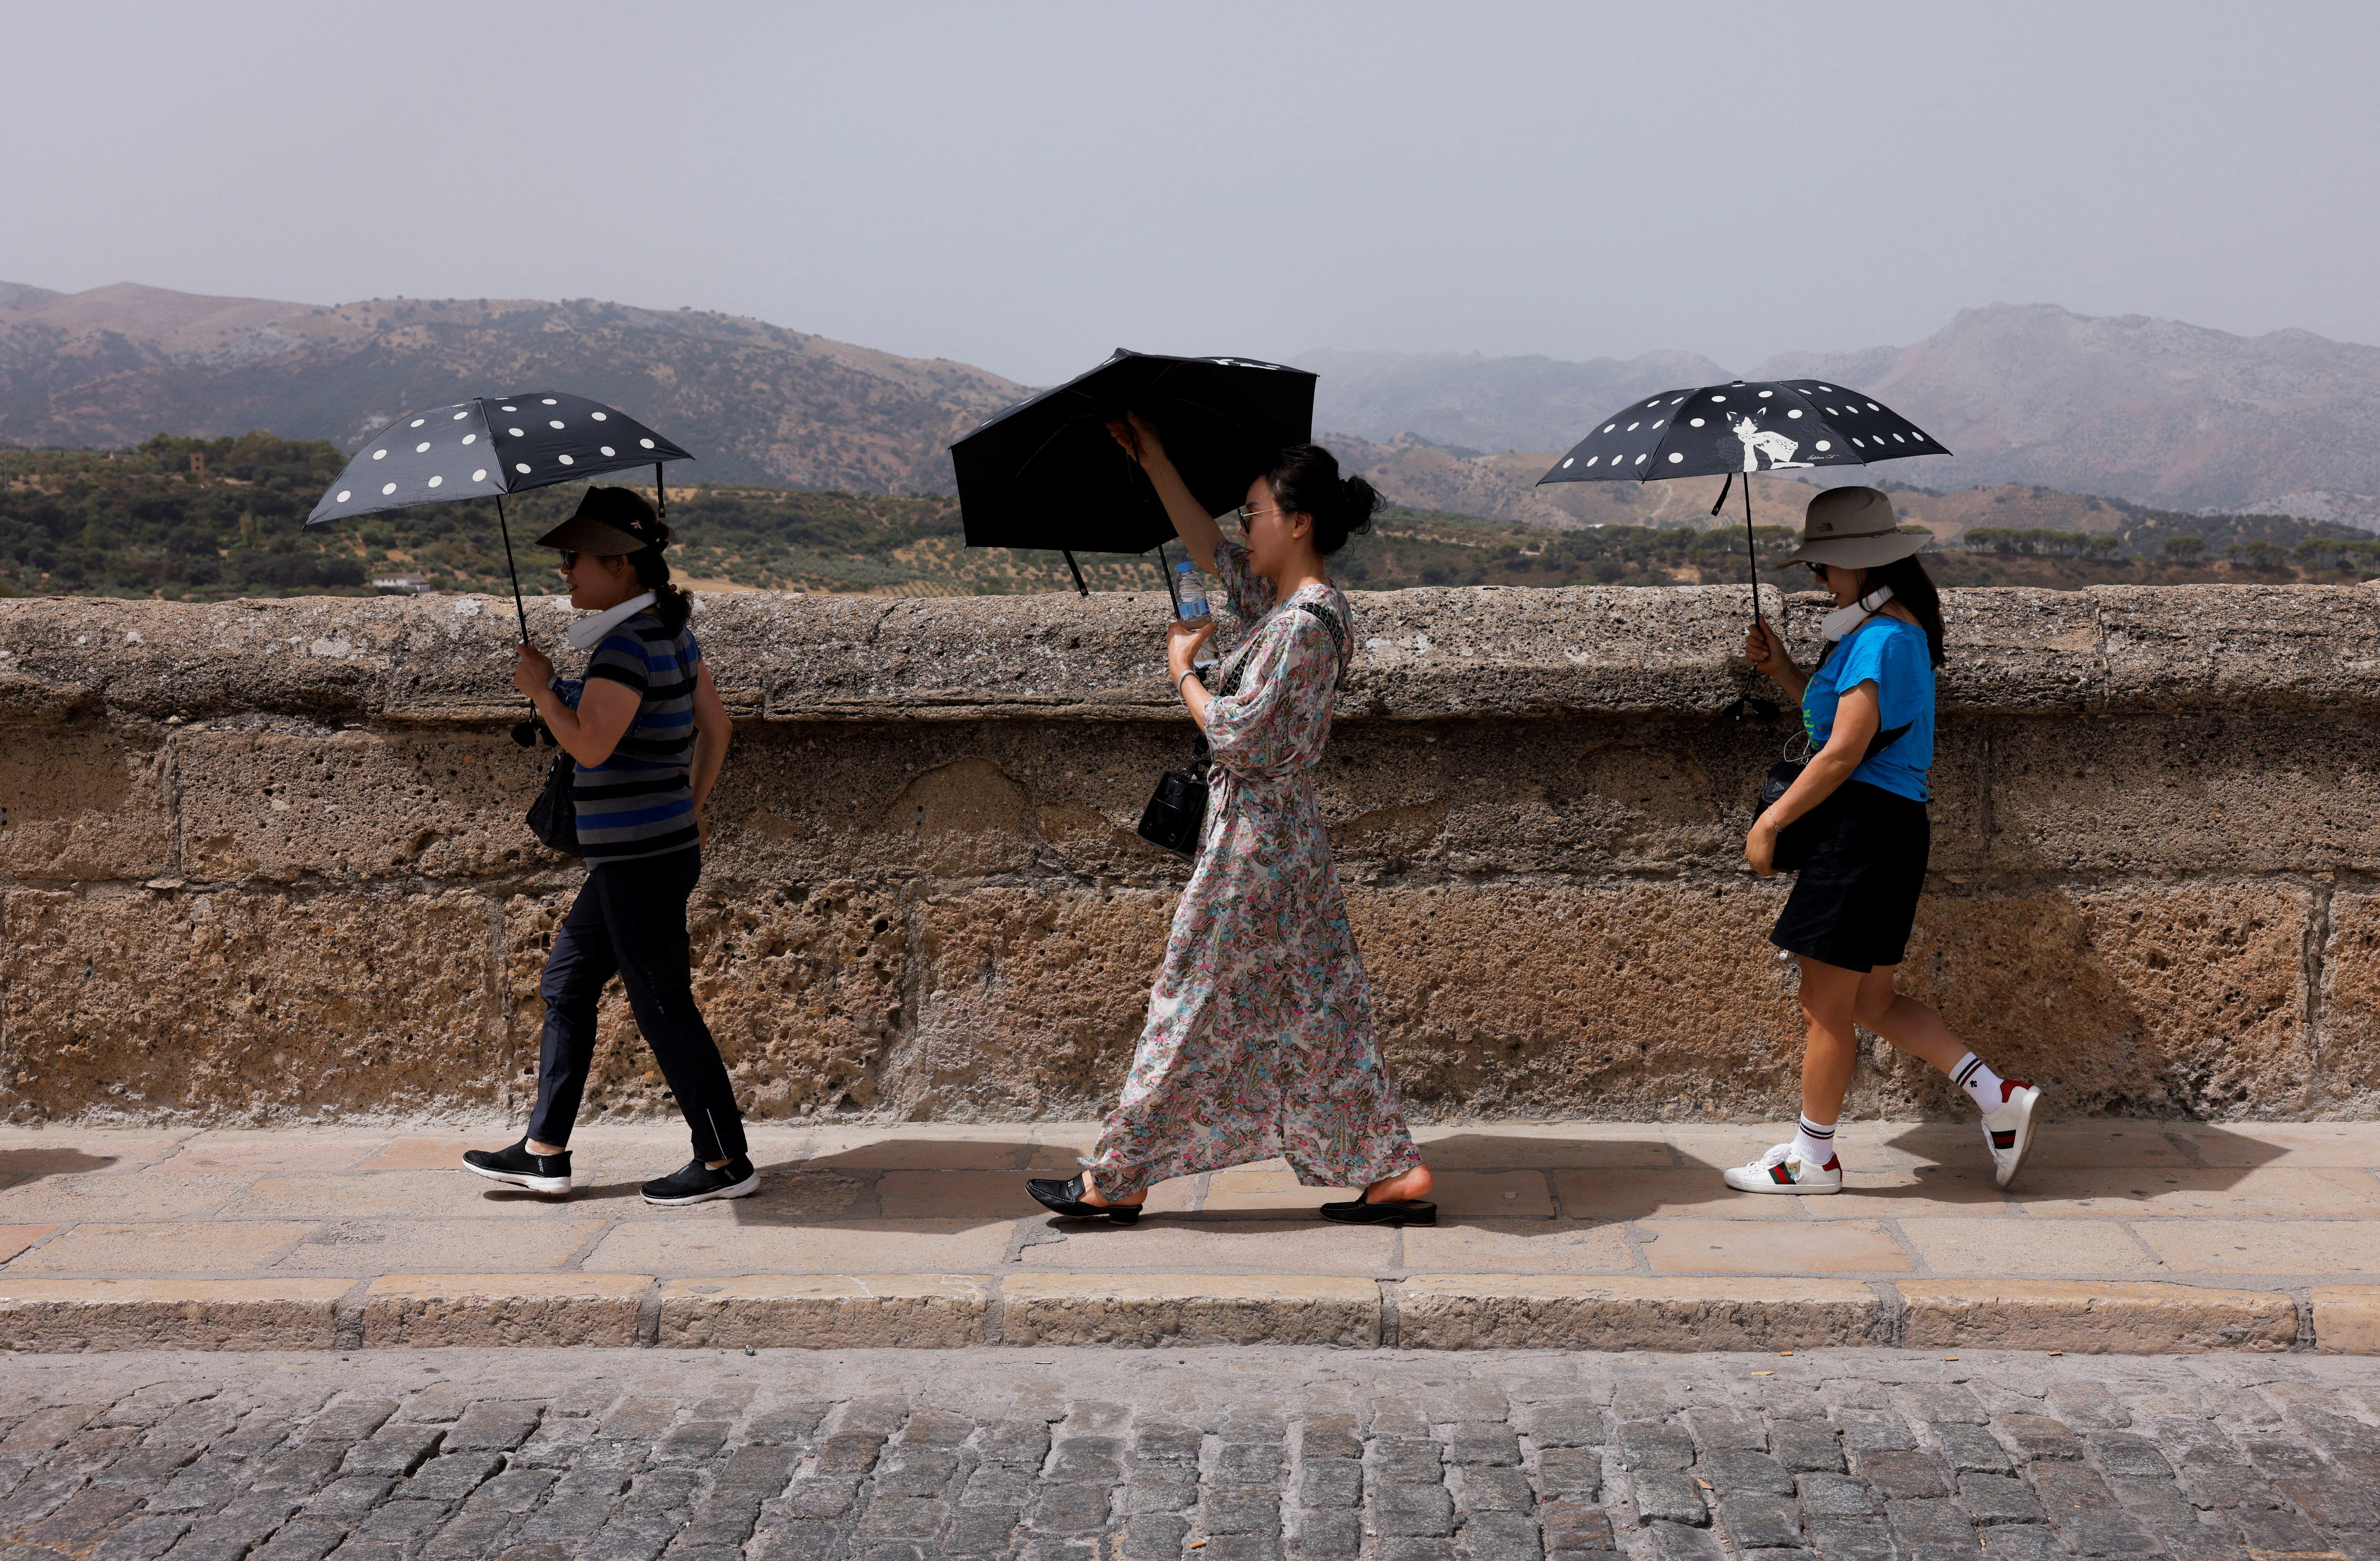 The third heatwave of the summer hits Spain